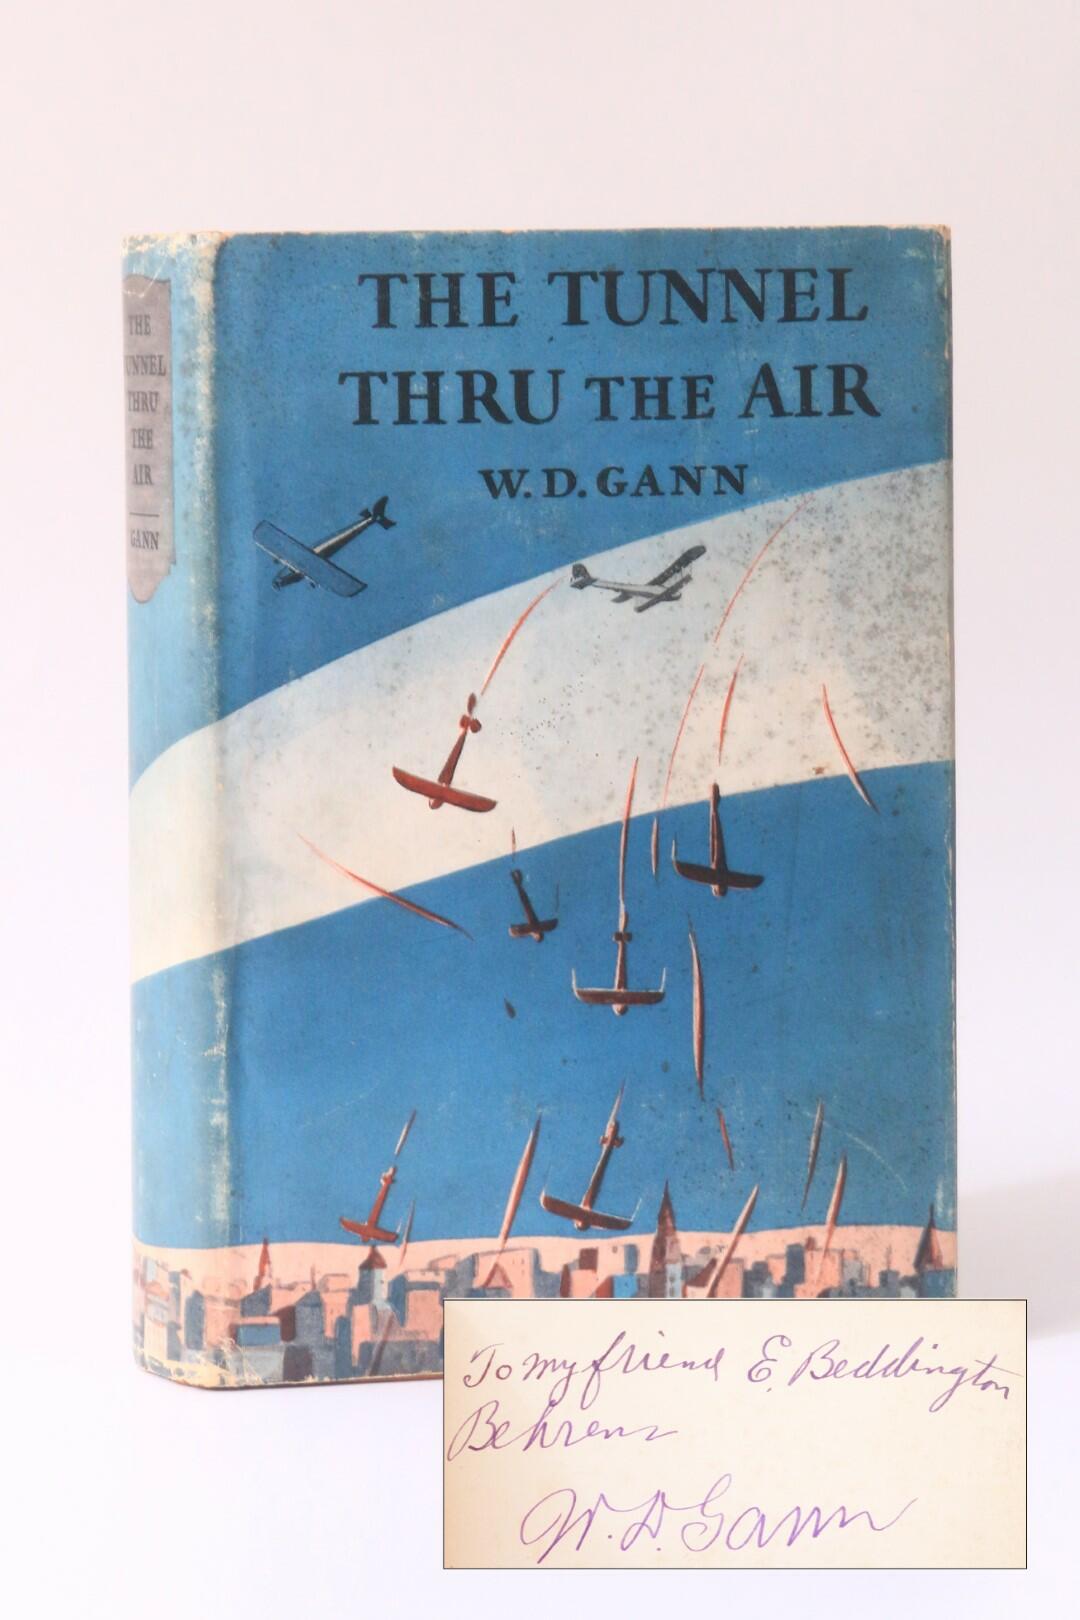 W.D. Gann - The Tunnel Thru the Air: Or Looking Back from 1940 - Financial Guardian Publishing Co., 1927, Signed First Edition.